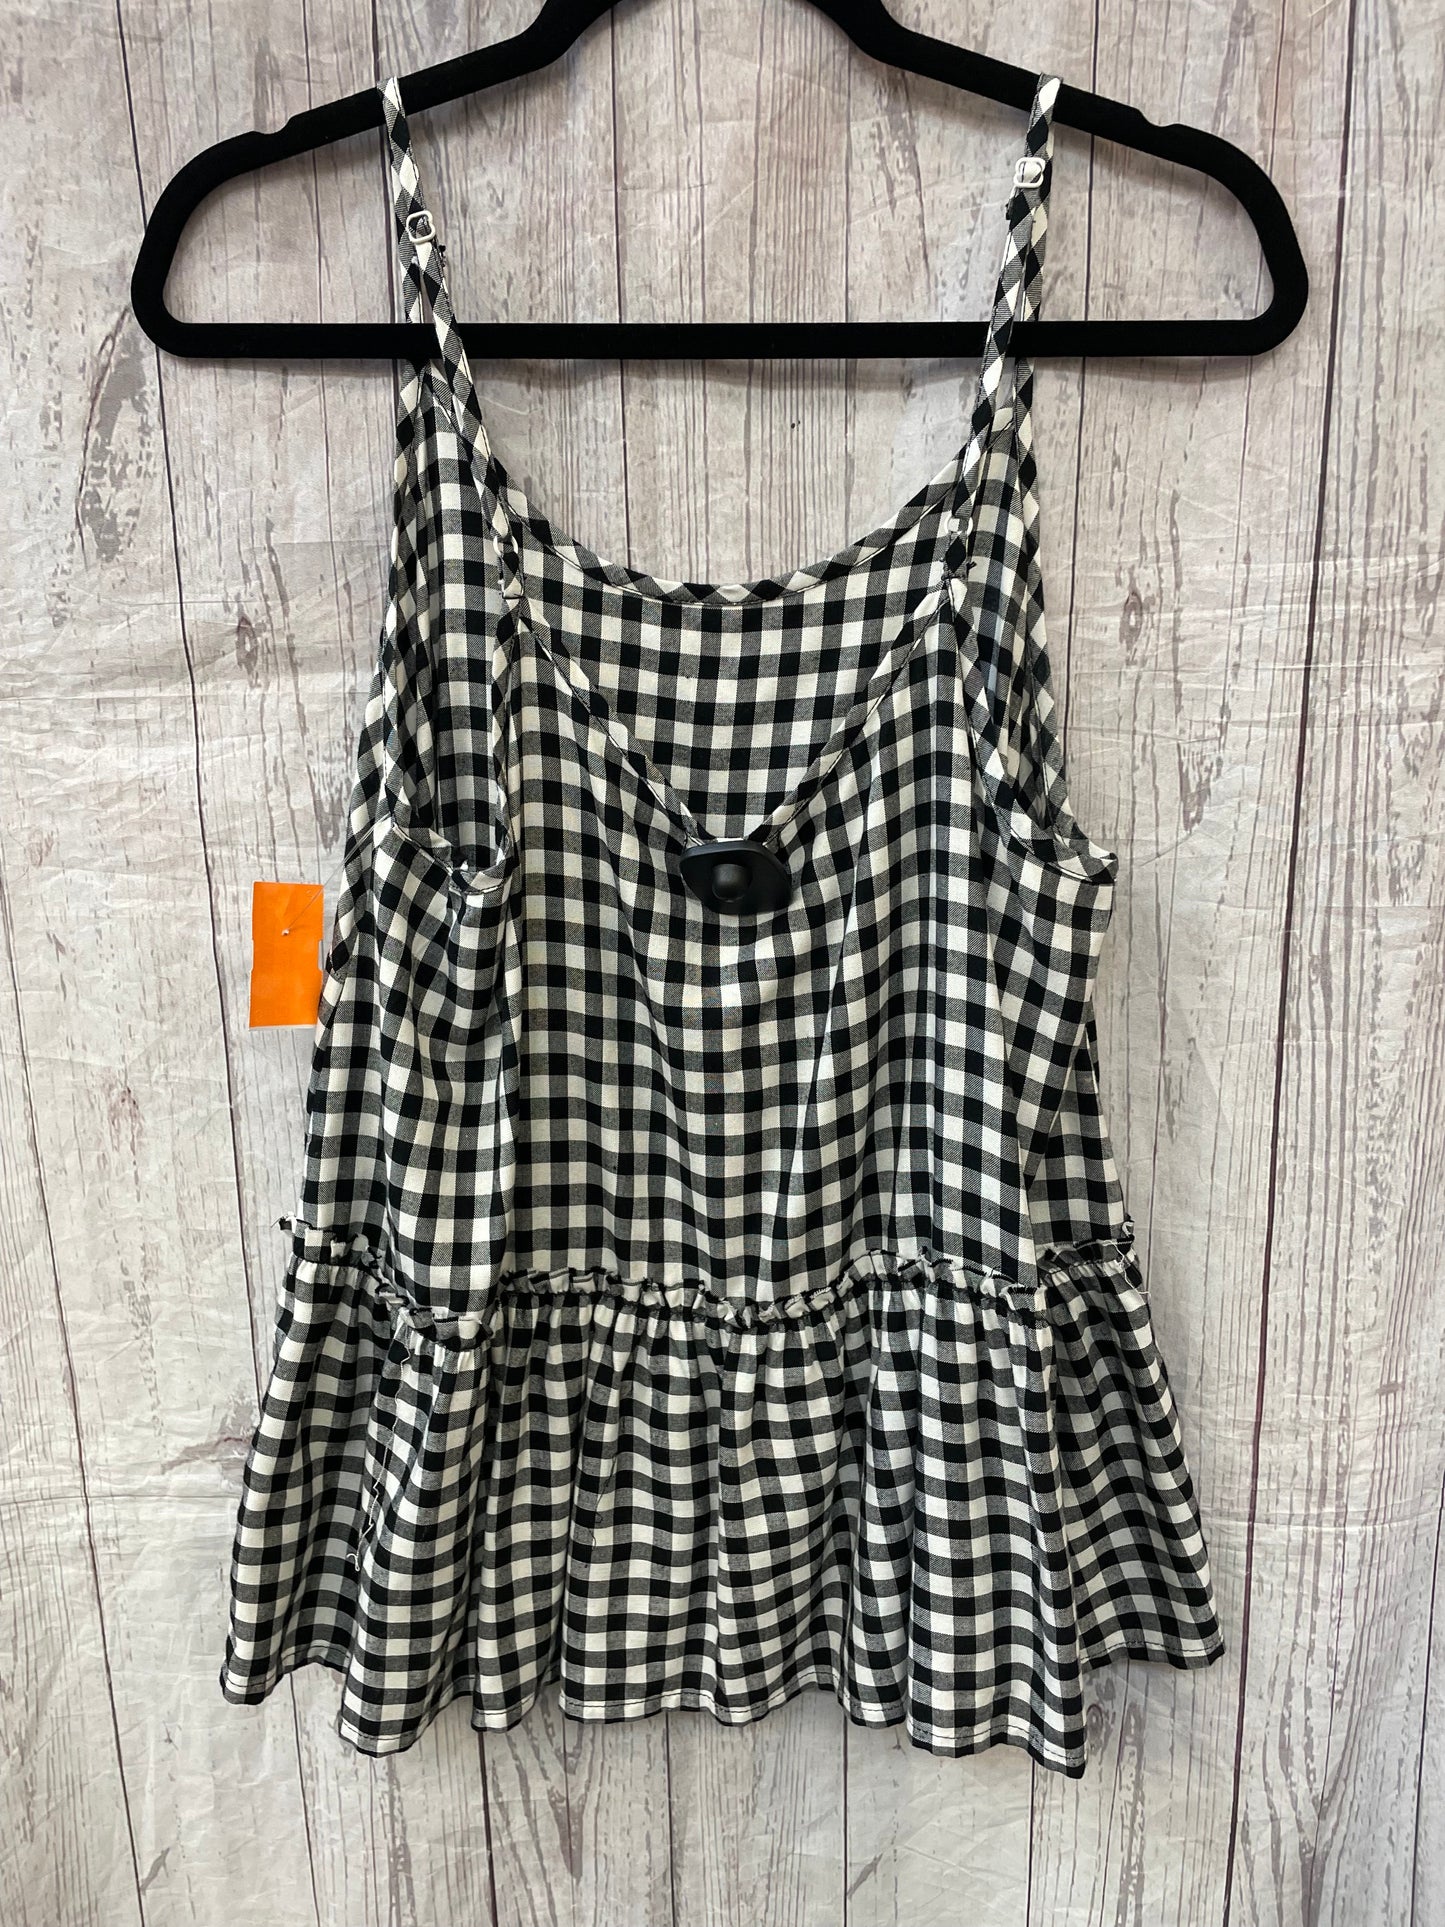 Top Sleeveless By Mudpie  Size: M